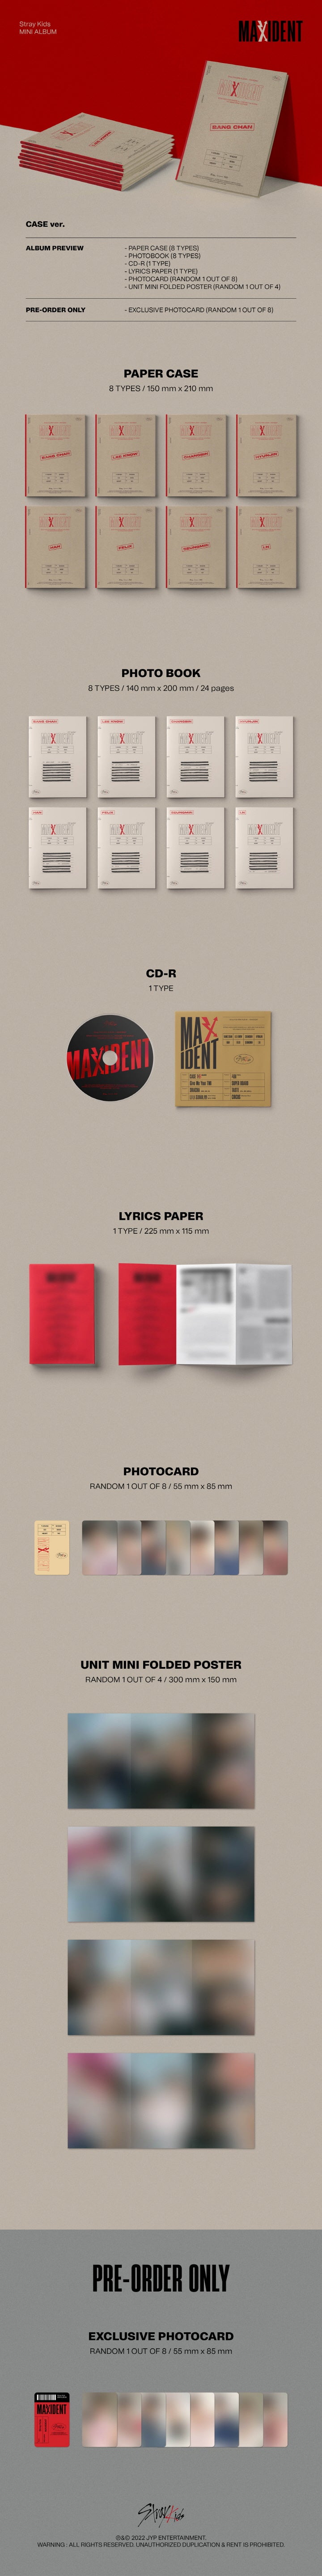 1 CD
1 Photo Book (24 pages)
1 Lyrics Paper
1 Photo Card (random out of 8 types)
1 Unit Mini Folded Poster (random out of ...